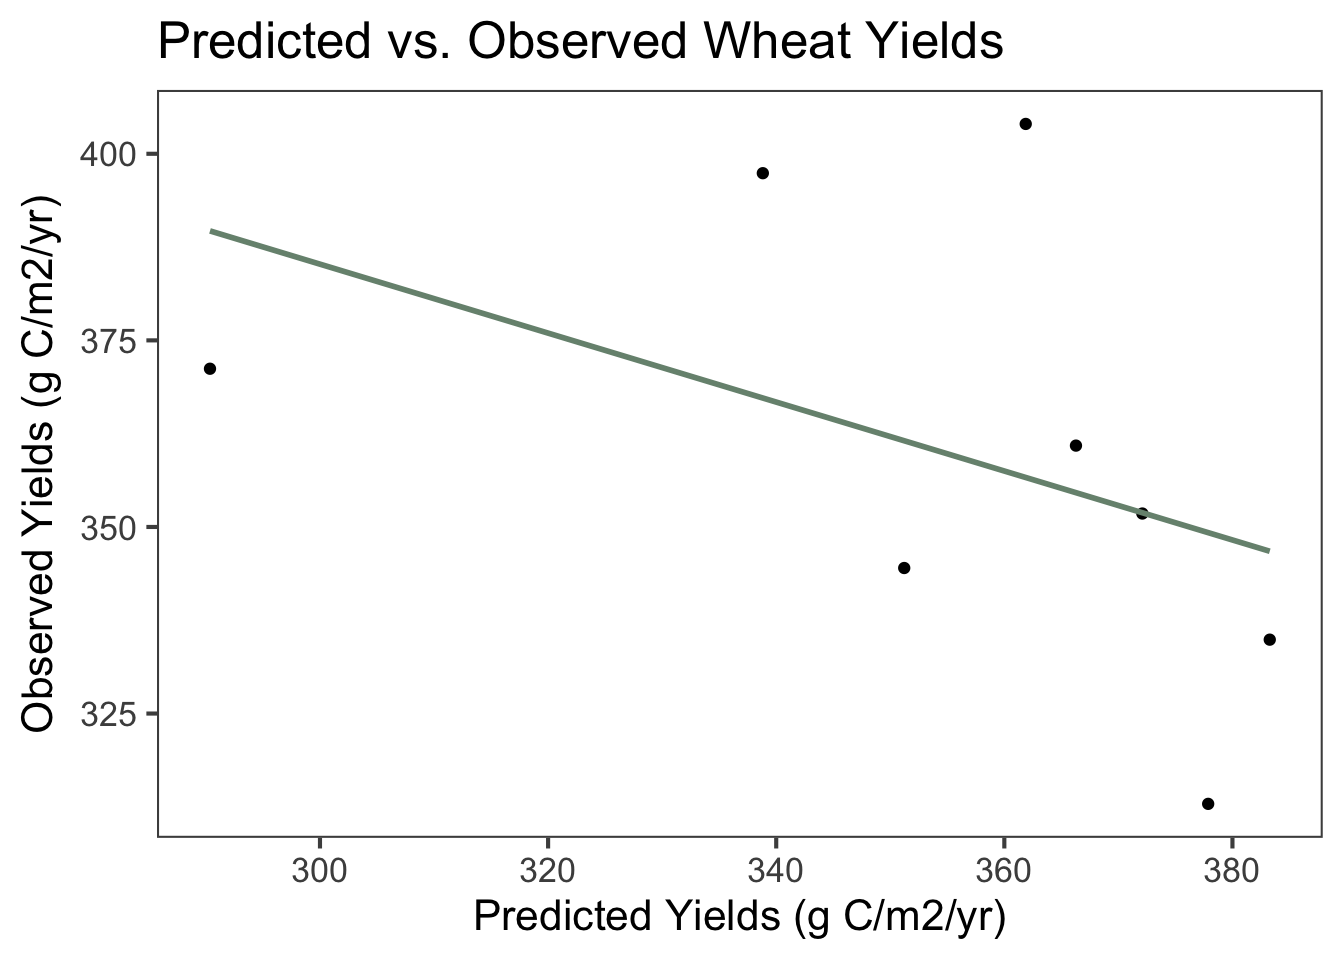 Scatterplot and linear regression line of predicted and observed wheat yields in grams of carbon (C) per m2 per year between 1999 and 2013. The equation of the line is -0.436x + 512, demonstrating that observed yields were lower than predicted yields on average. The multiple R2 value is 0. 201 and the adjusted R2 value is 0.0683, indicating a very weak linear relationship. The p-value is 0.265, considerably higher than what is generally considered to be significant.